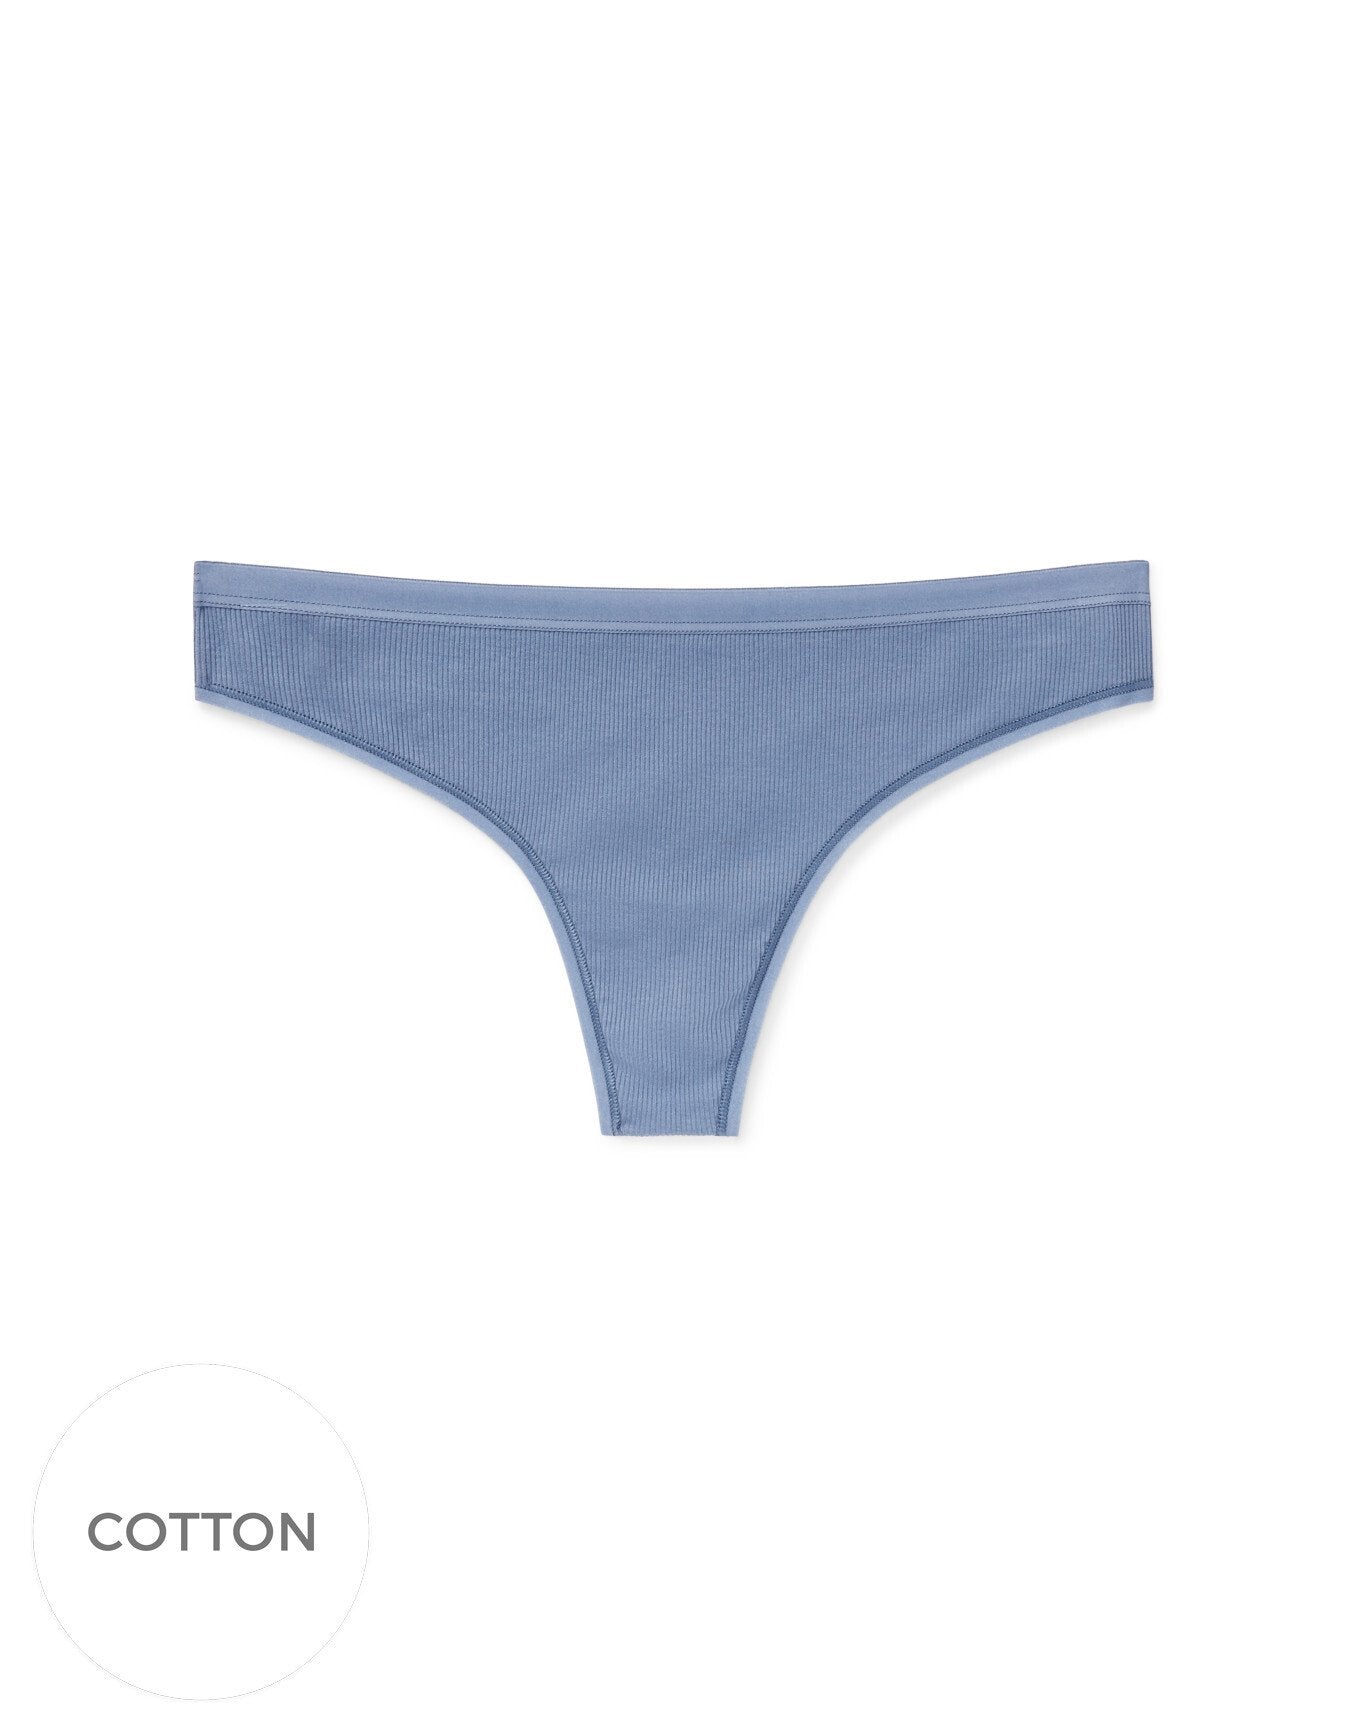 Adore Me Alexandra Ribbed Cotton Thong in color DustyIris 82O1 and shape thong